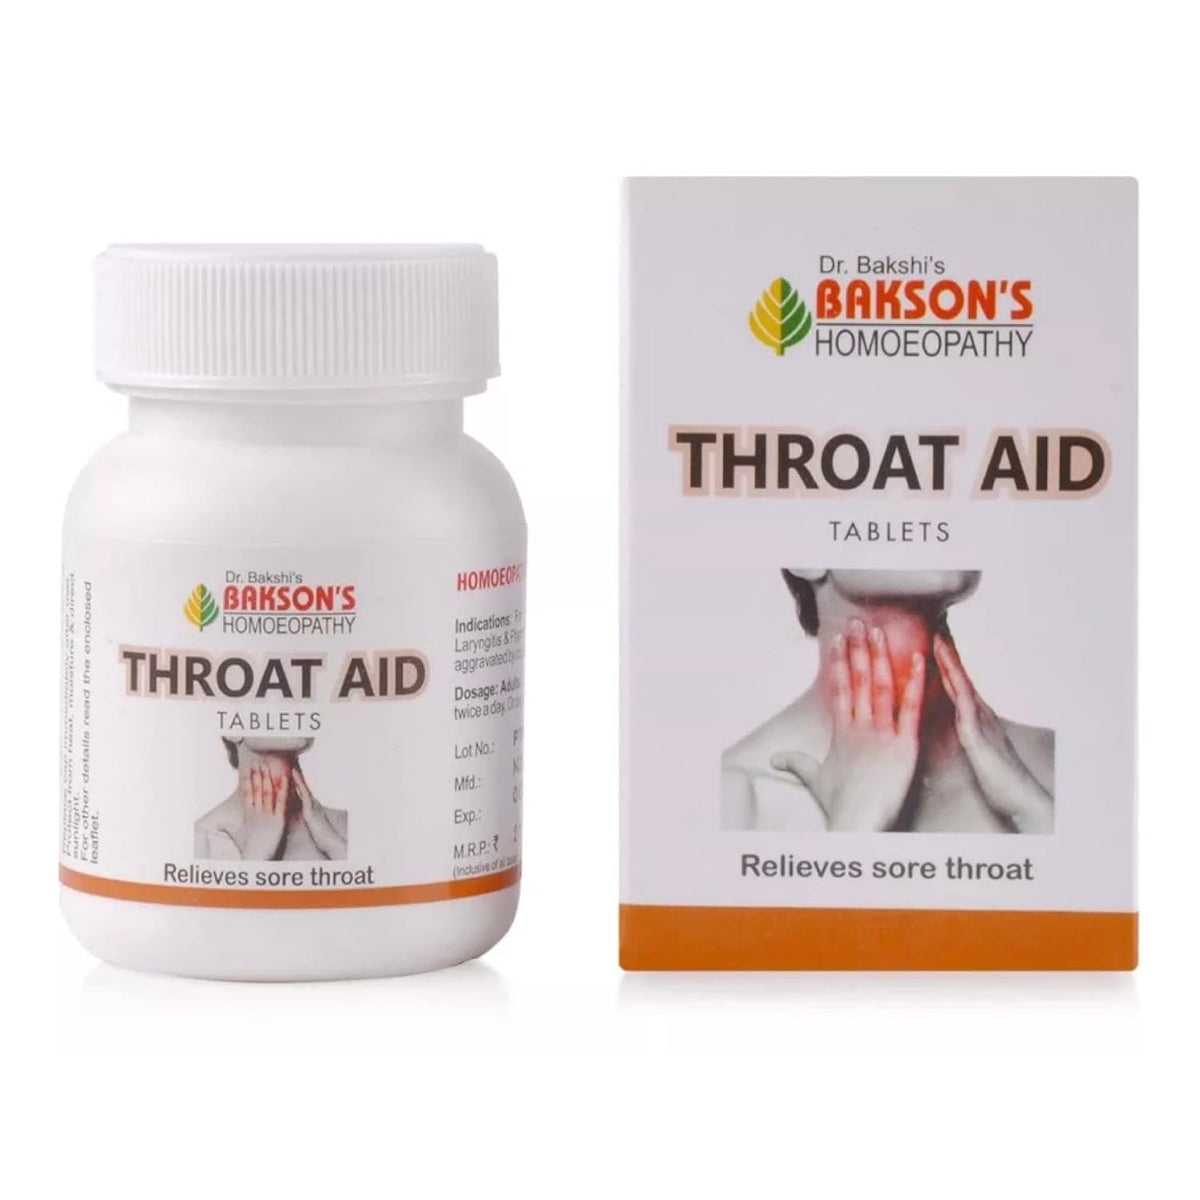 Bakson's Homoeopathy Throat Aid Relieves Sore Throat Tablet